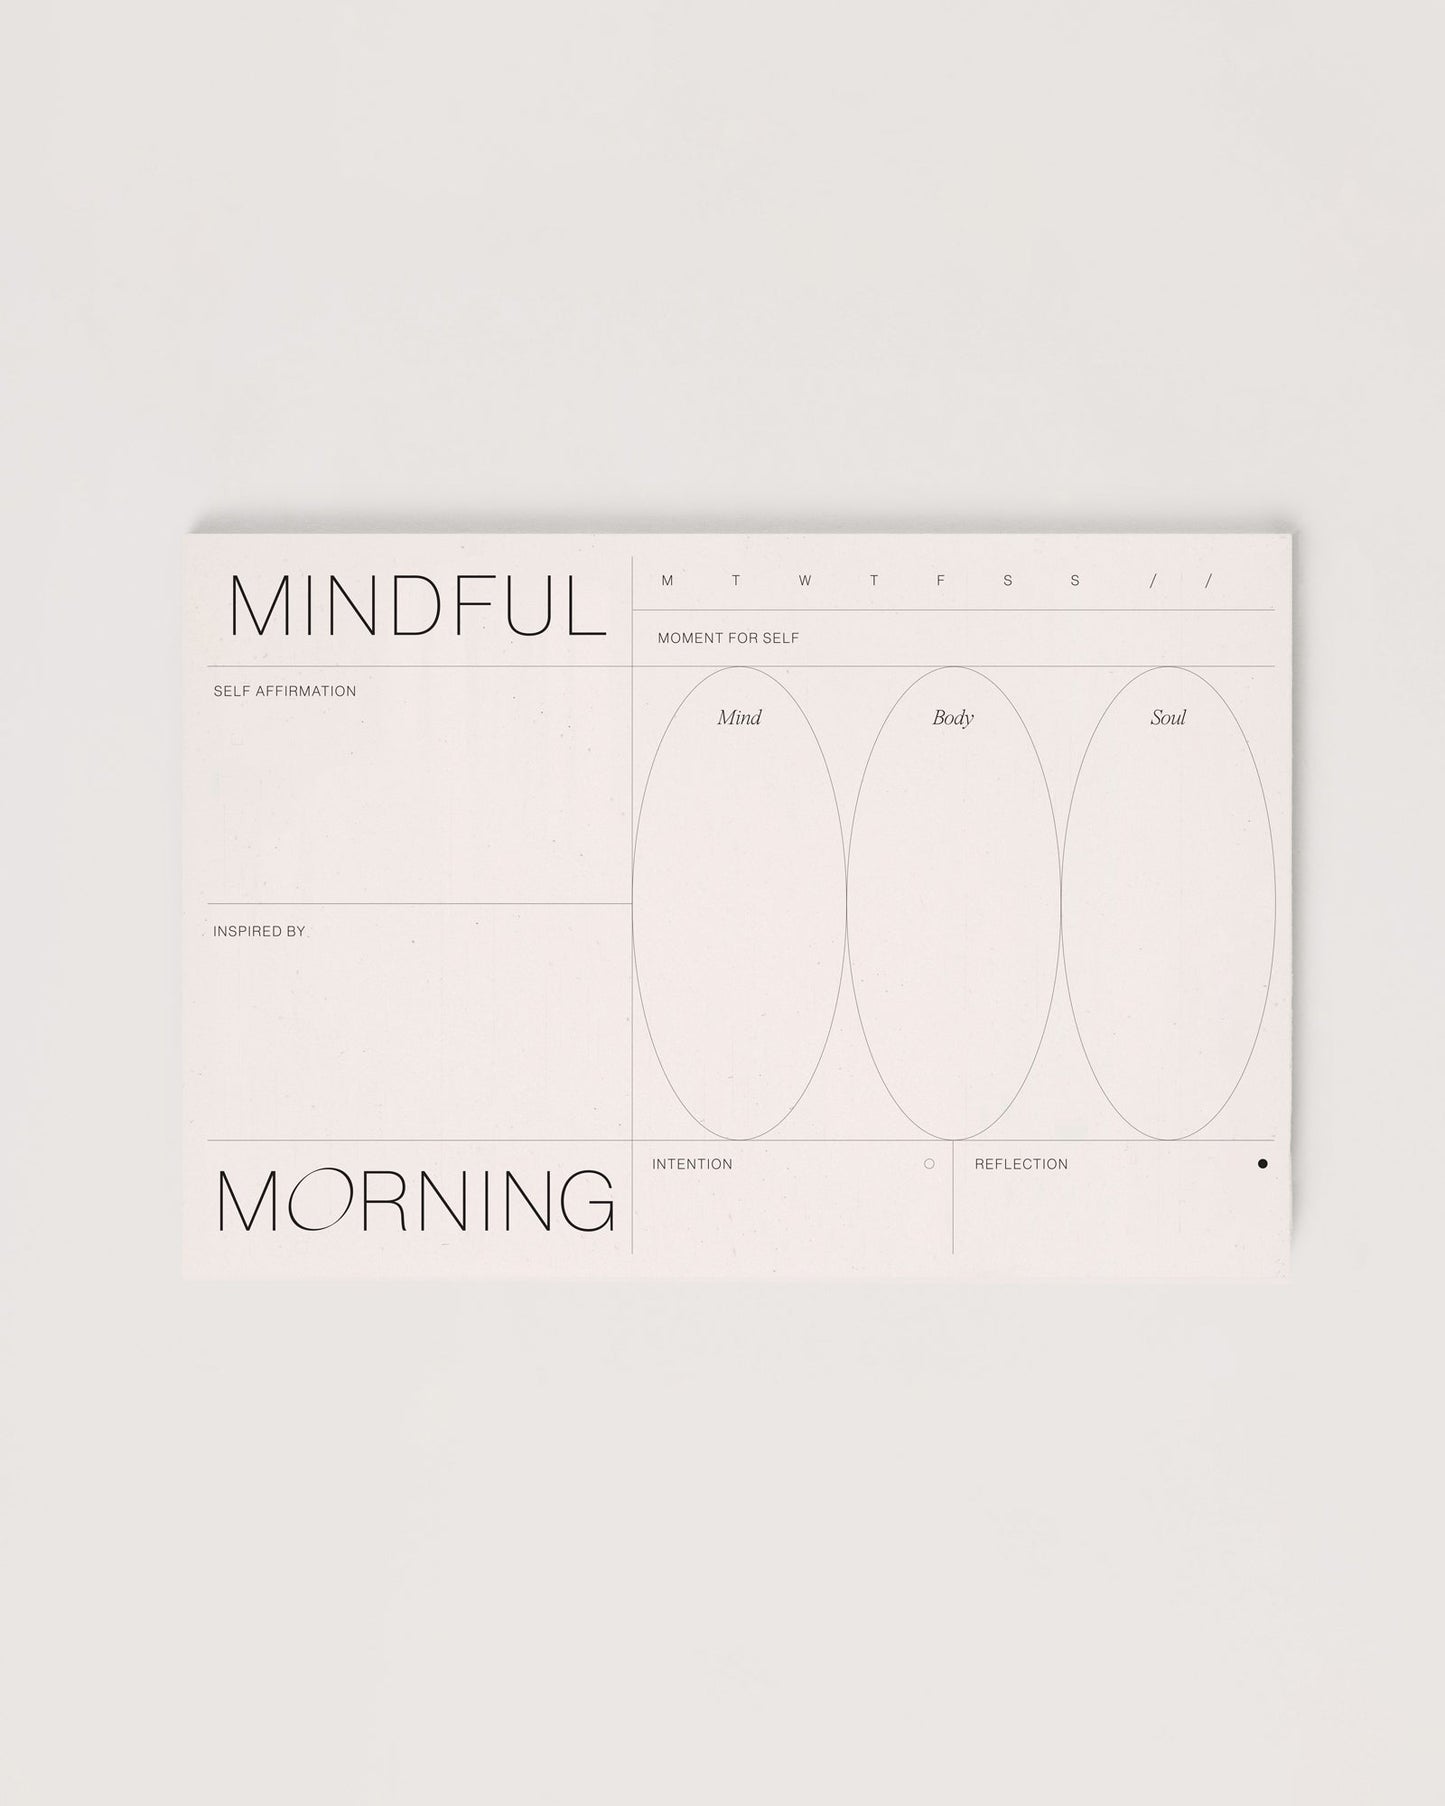 Mindful Morning Note Pad